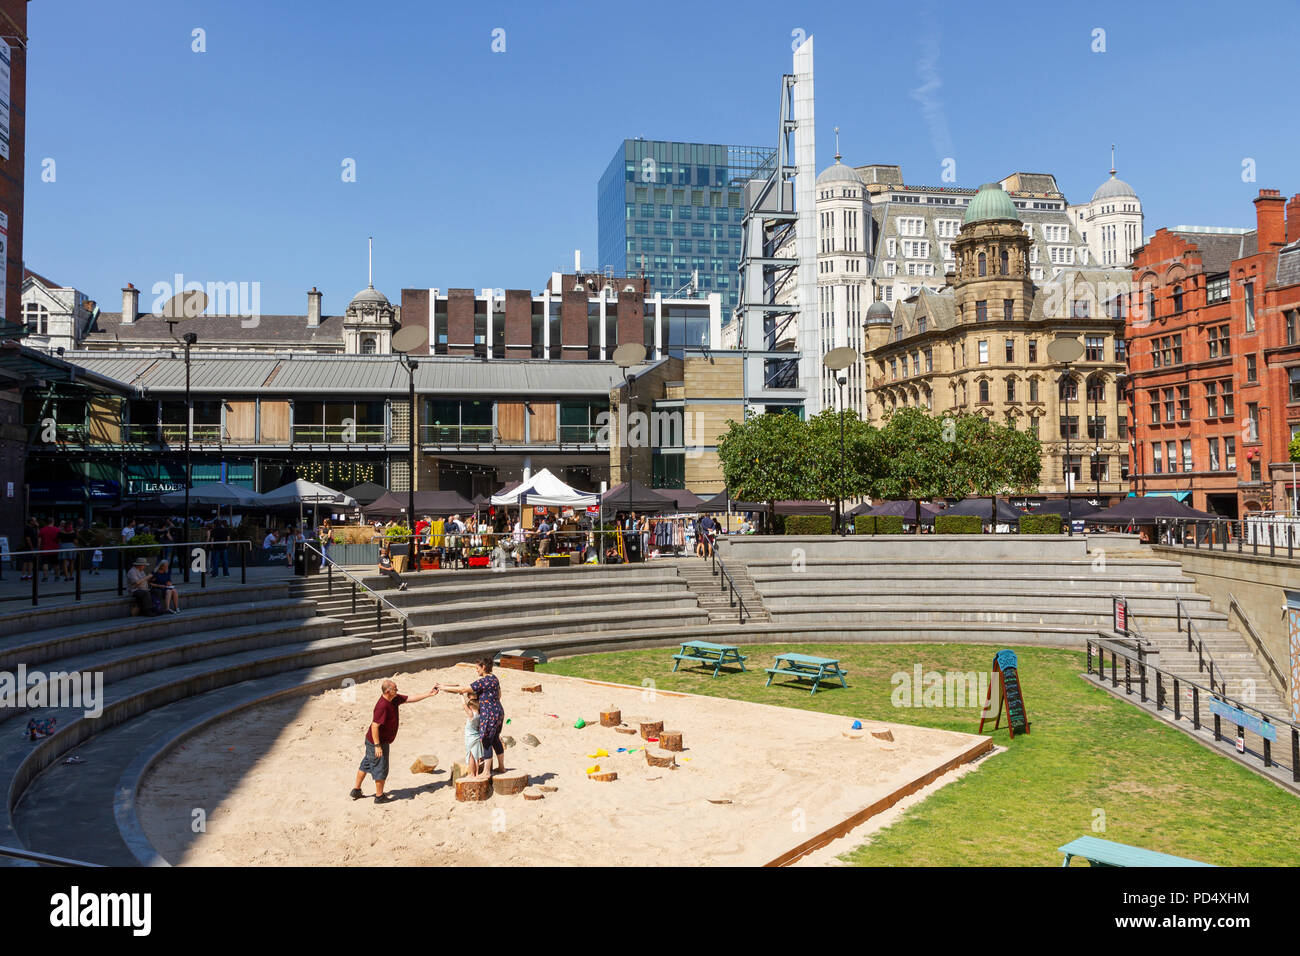 Great Northern Square on Peter Street, Manchester Stock Photo